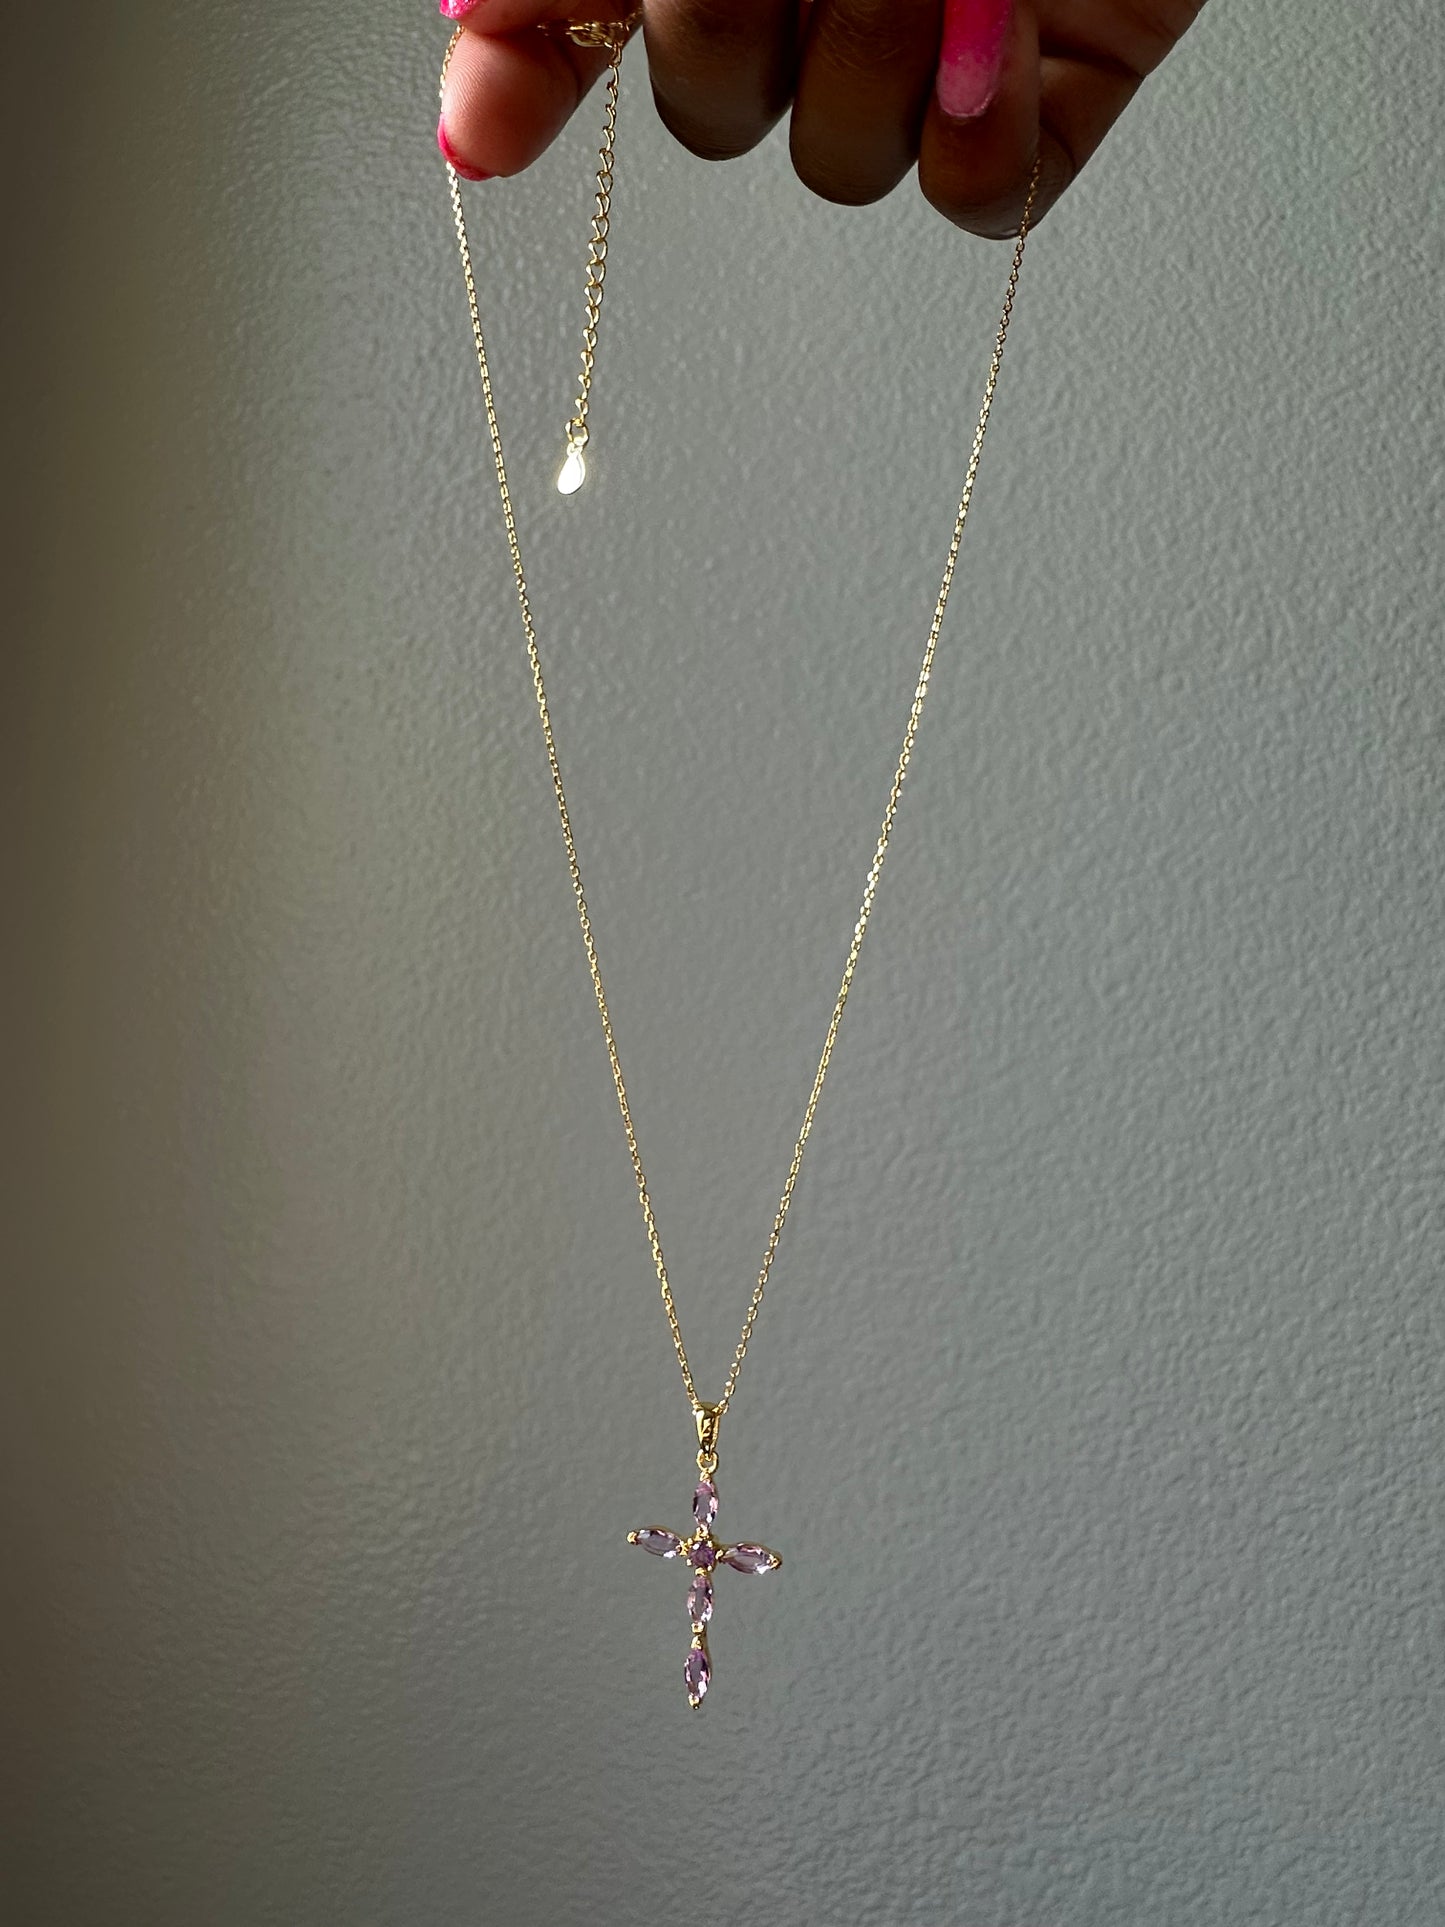 The Stained Glass Cross Necklace